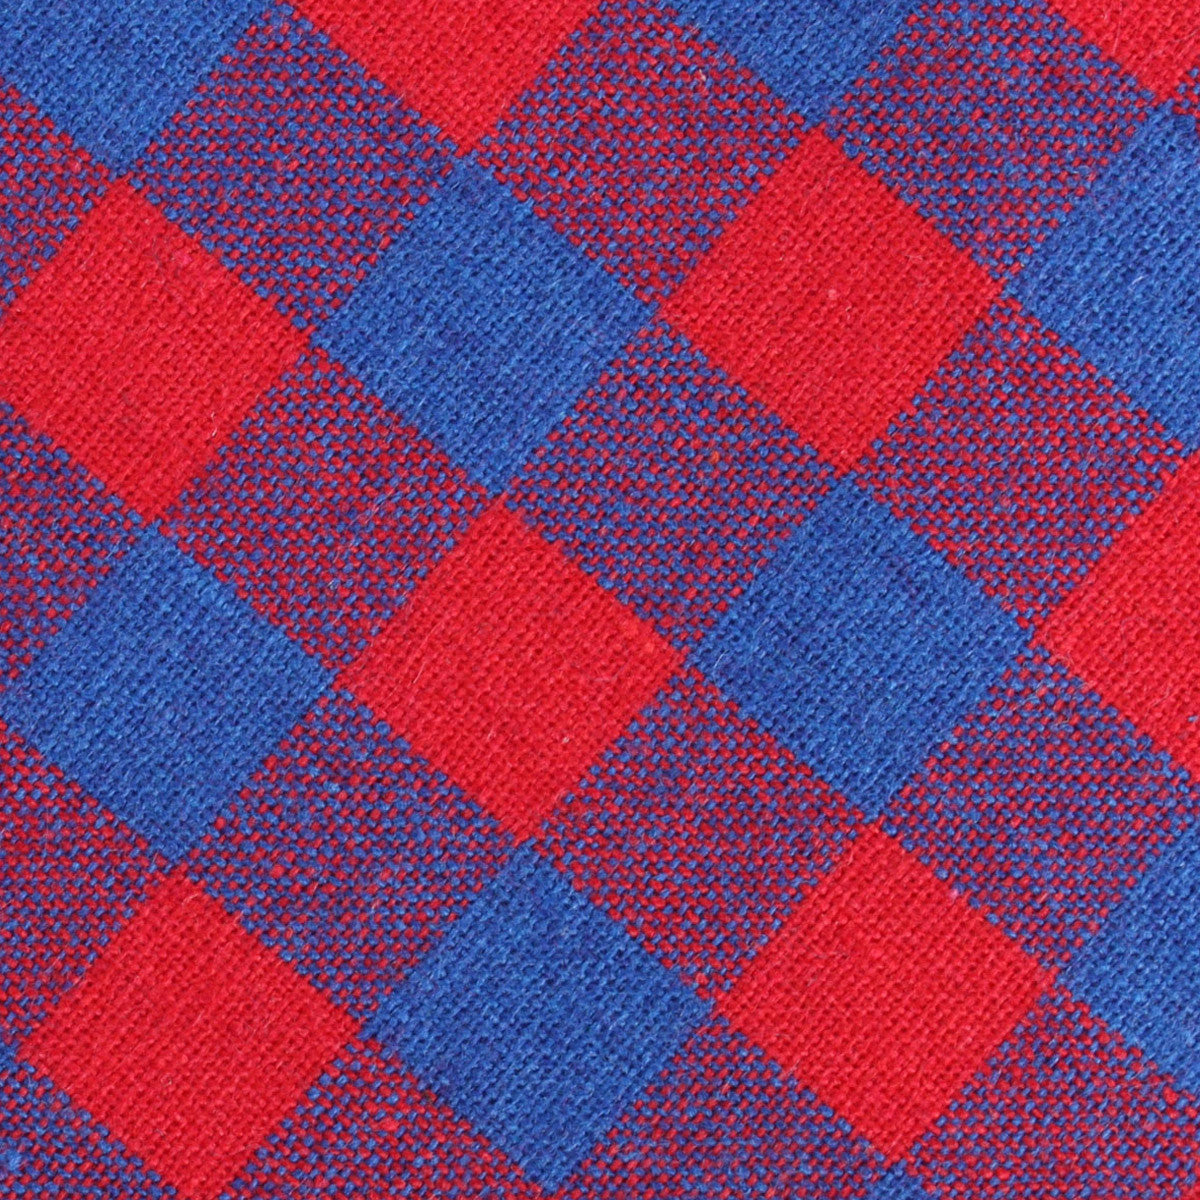 Blue & Red Gingham Fabric Pocket Square